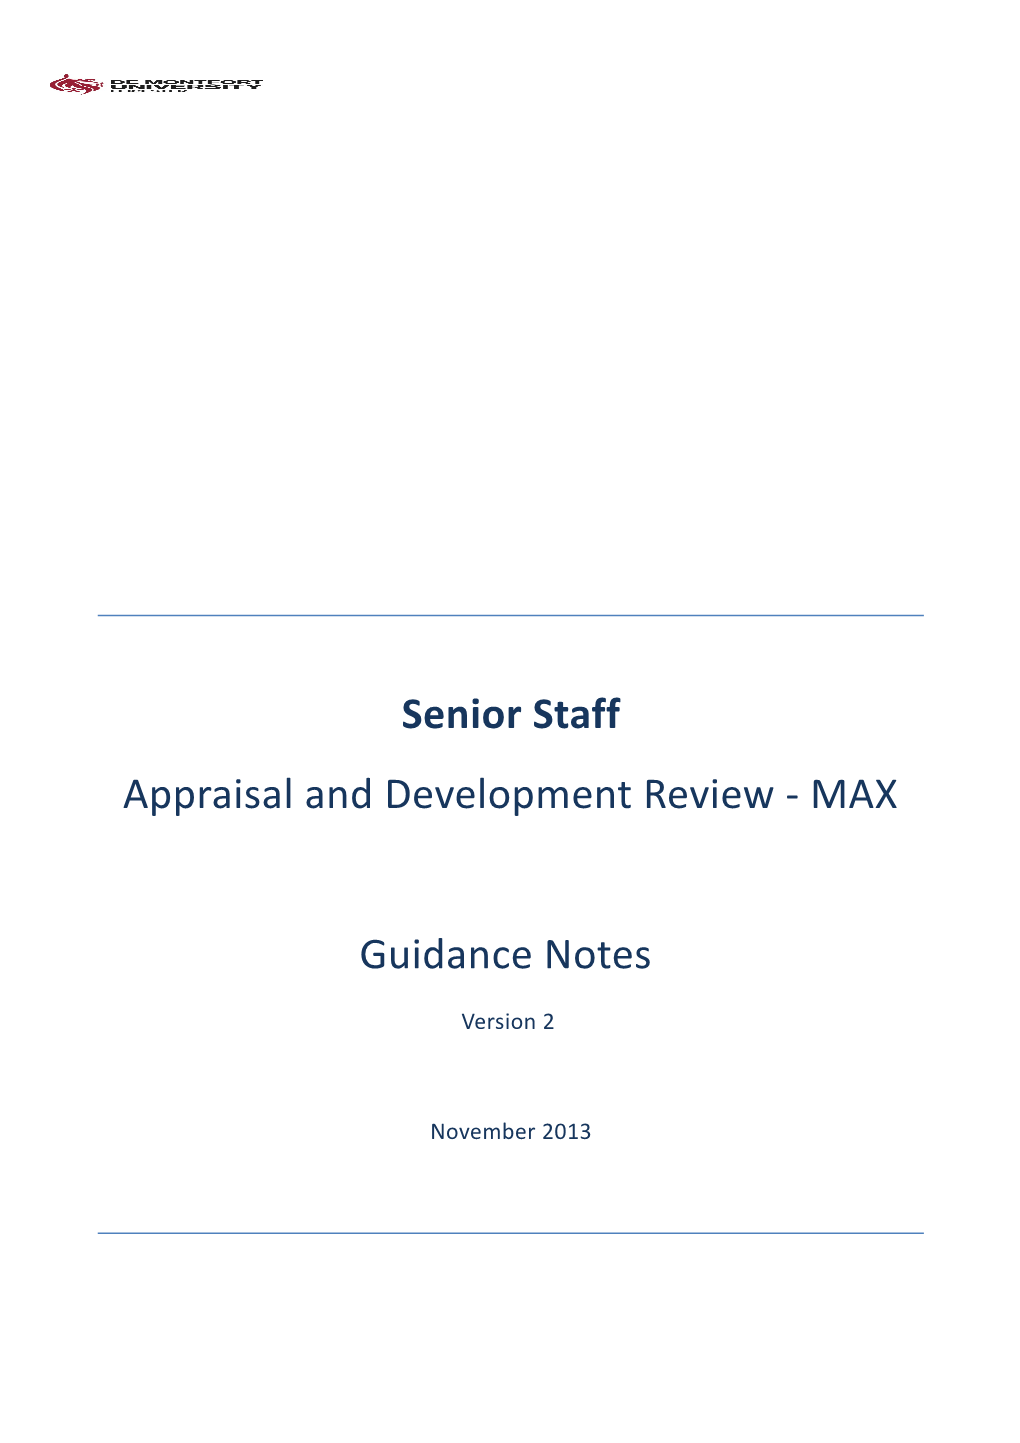 2.High-Level Timescales for Annual MAX Review Cycle